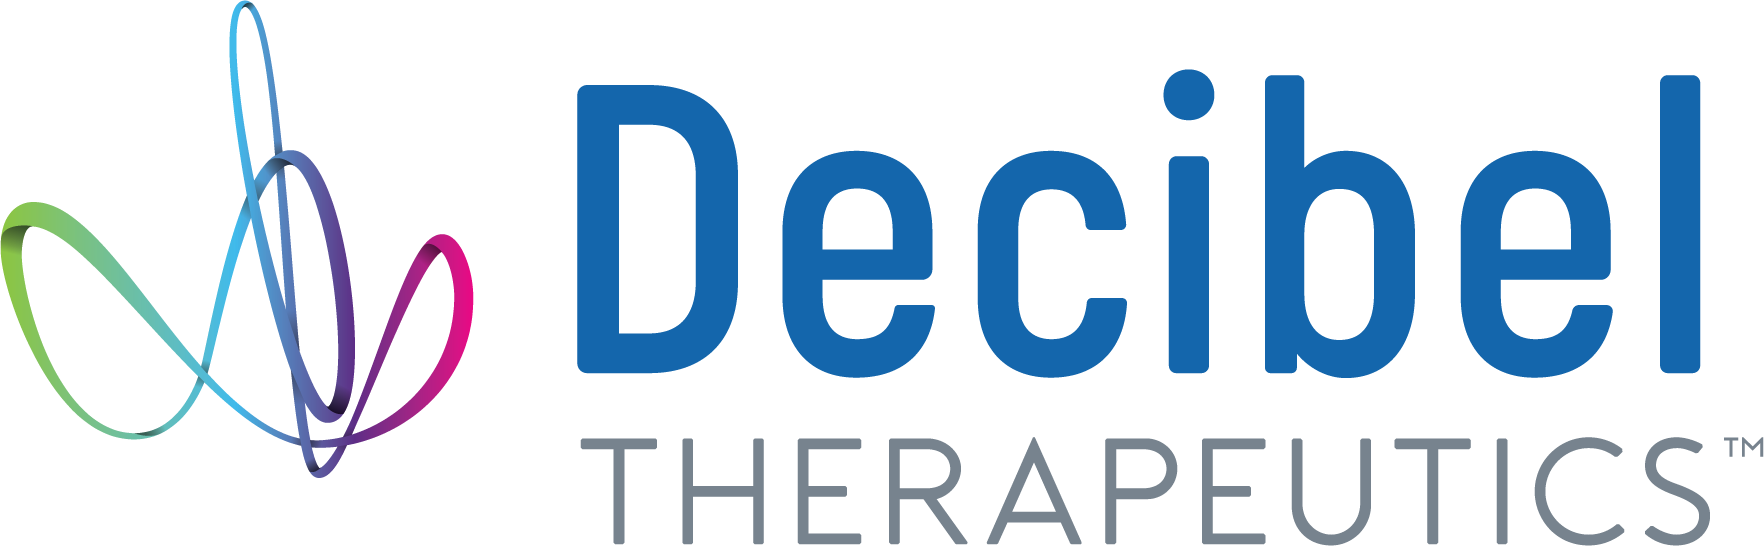 Decibel Therapeutics Announces Approval of Clinical Trial Application by the Spanish Agency of Medicines and Medical Devices (AEMPS) to Initiate Clinical Development of Lead Gene Therapy Candidate DB-OTO